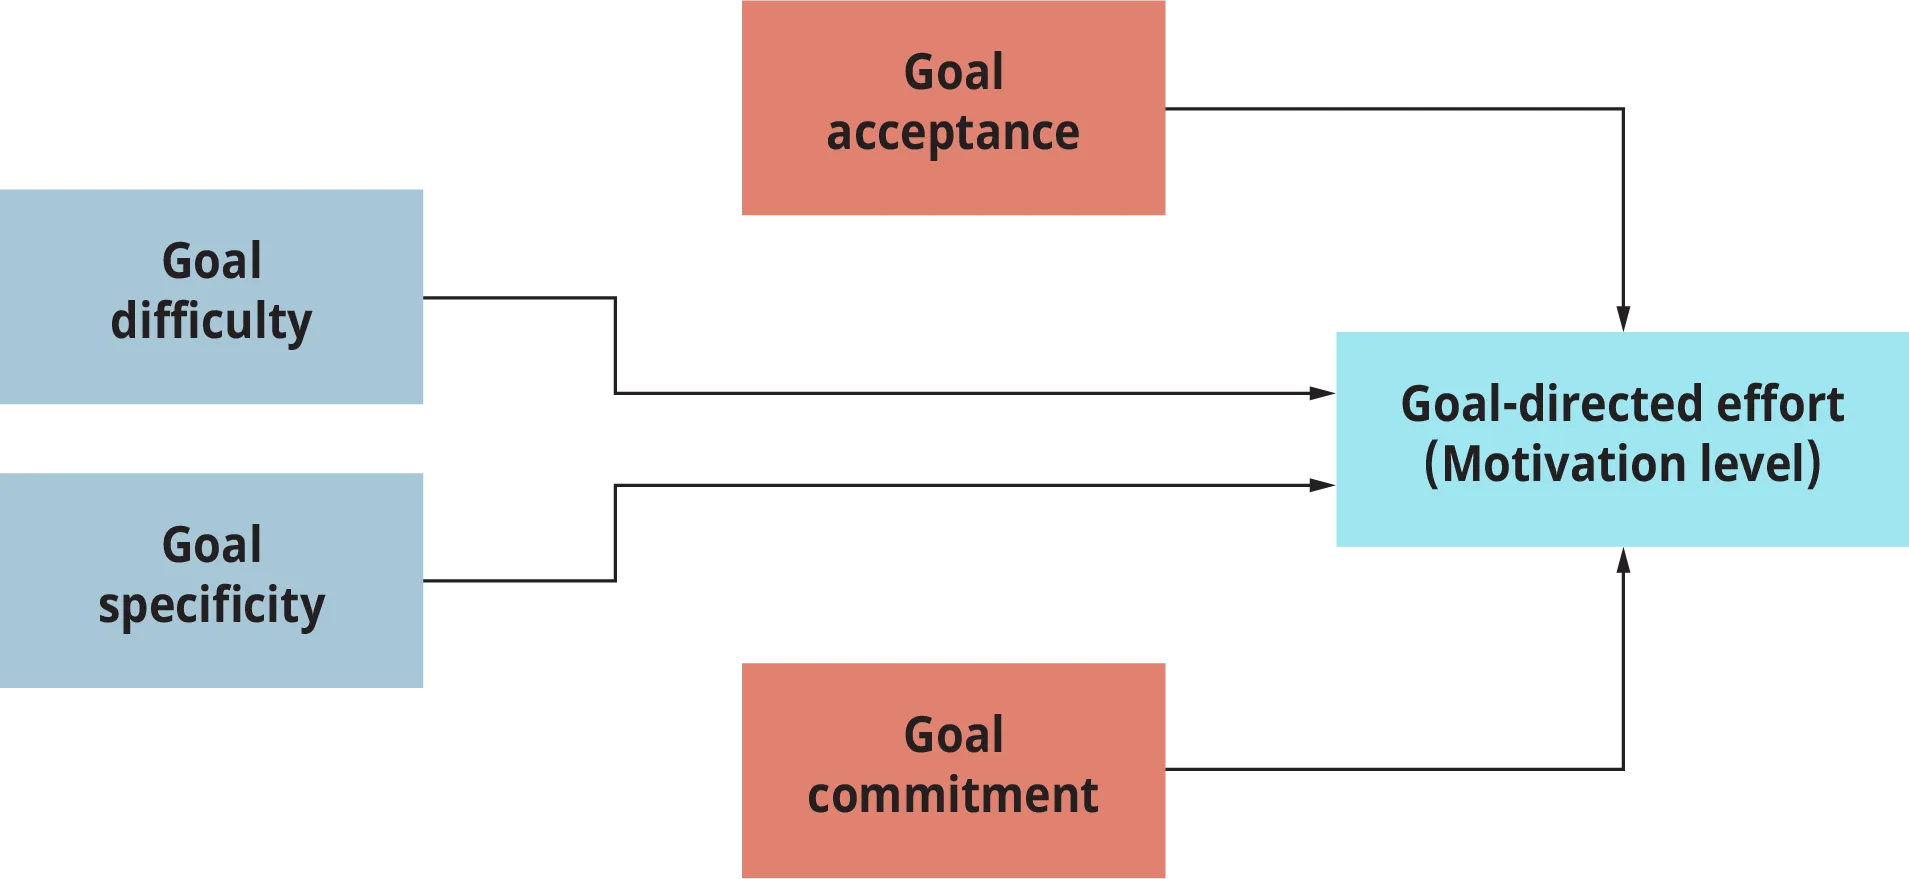 A model of goal setting represents the conditions necessary to maximize goal-directed effort.